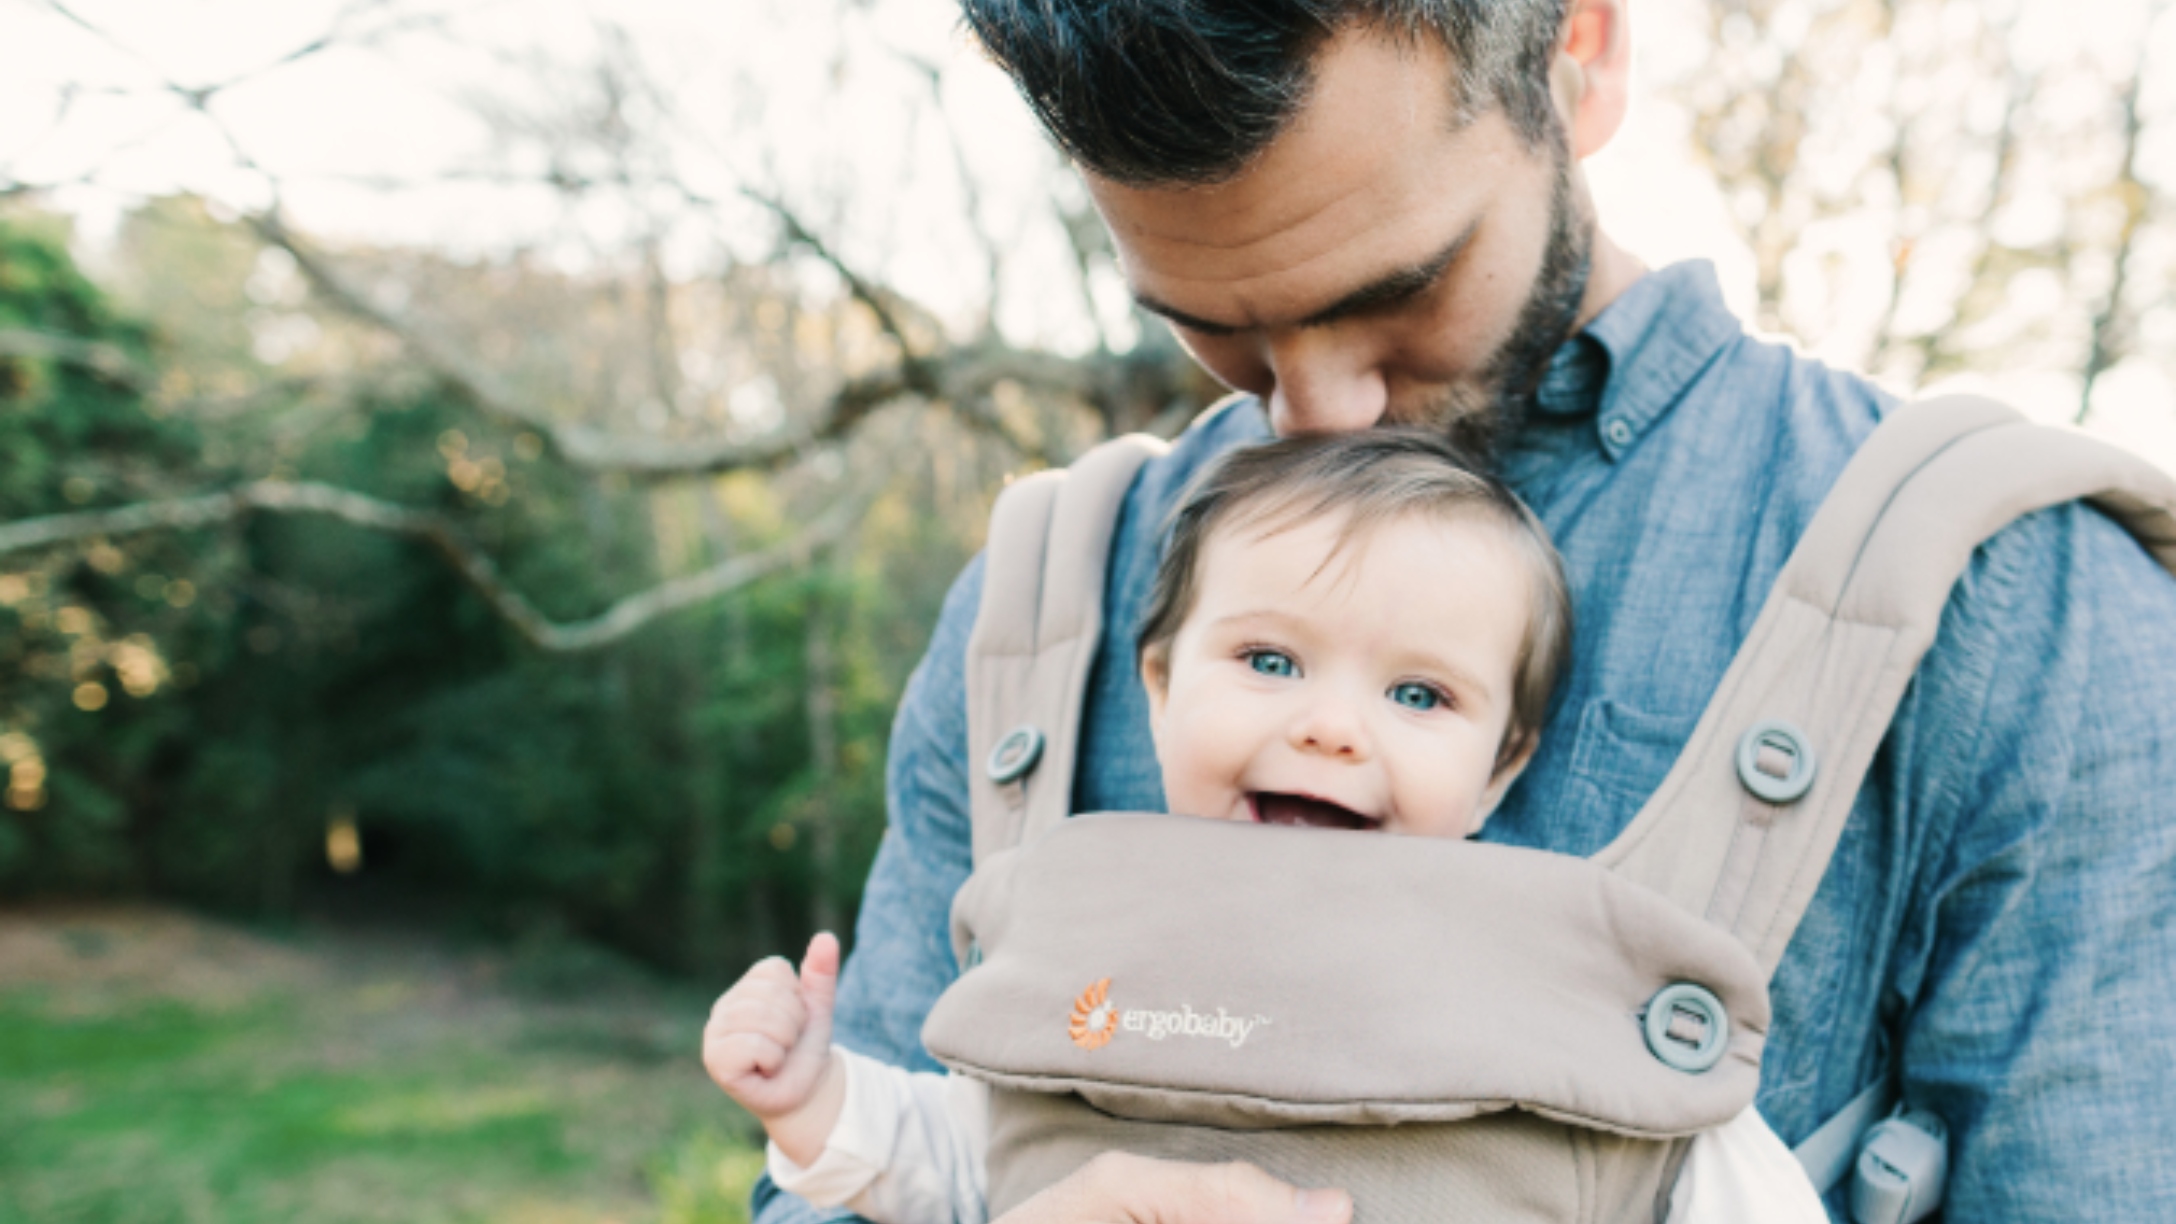 ergobaby carrier used